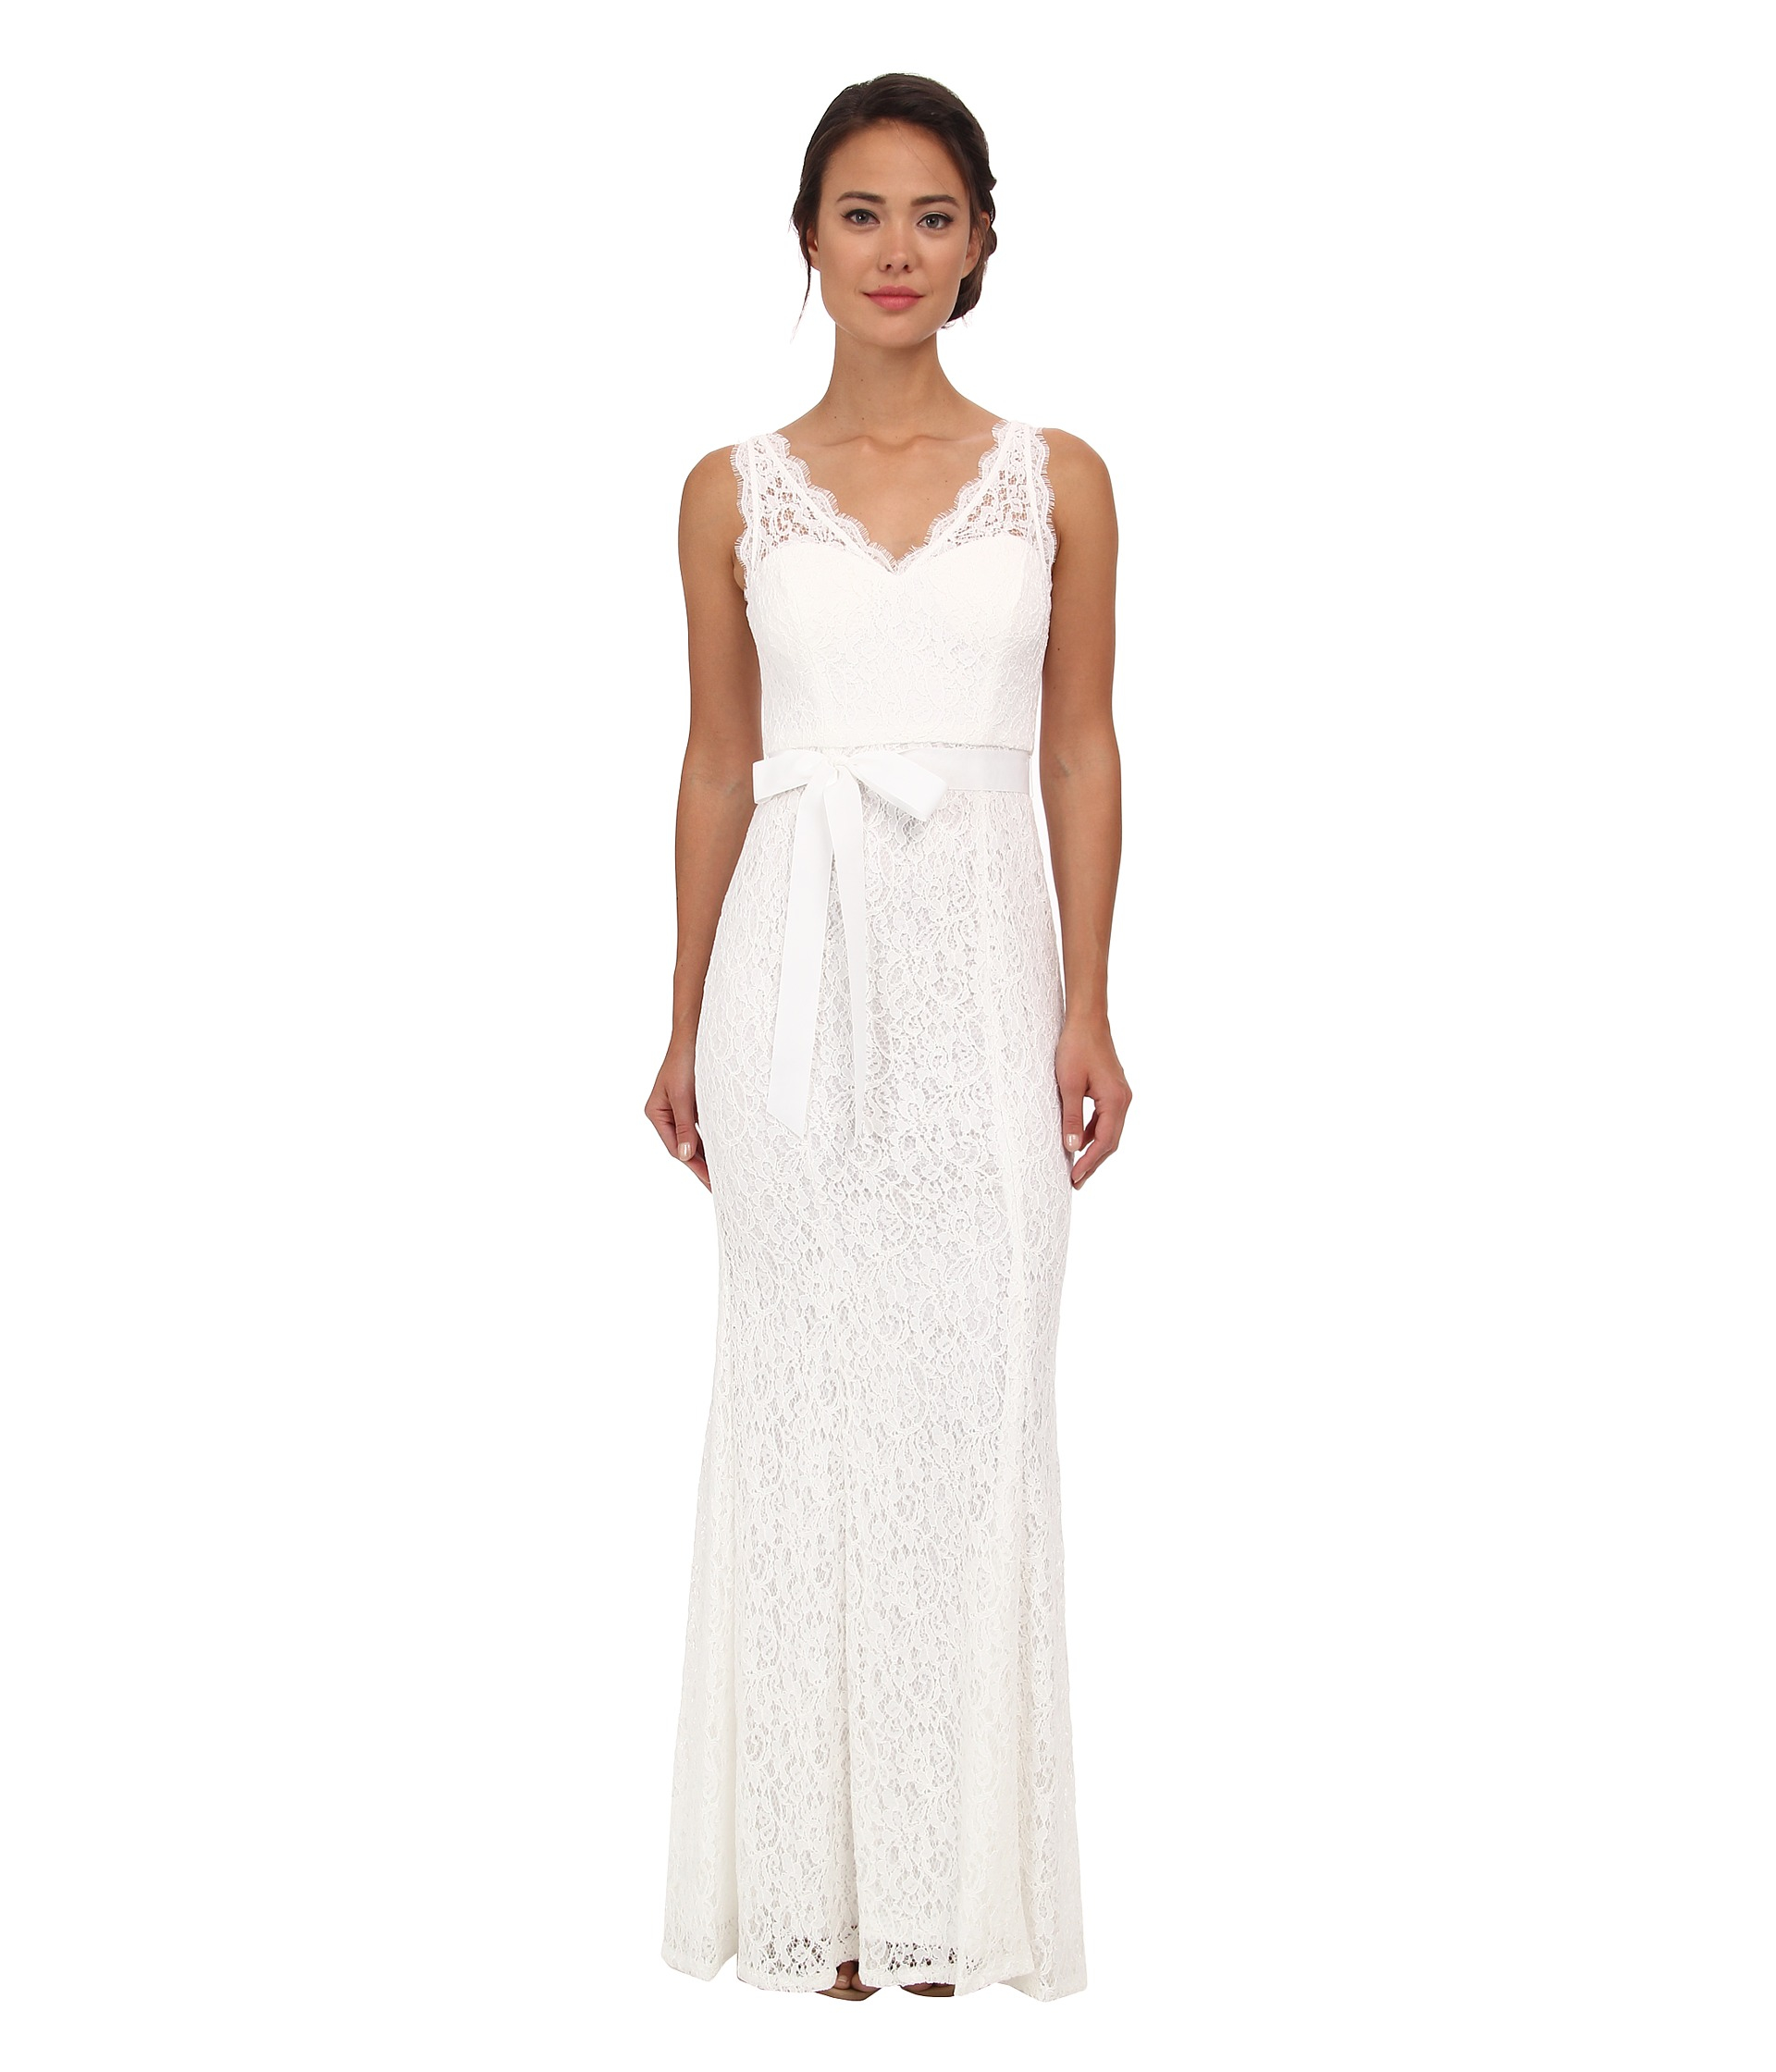 Adrianna Papell Sleeveless V-neck Lace Gown in Ivory (White) - Lyst